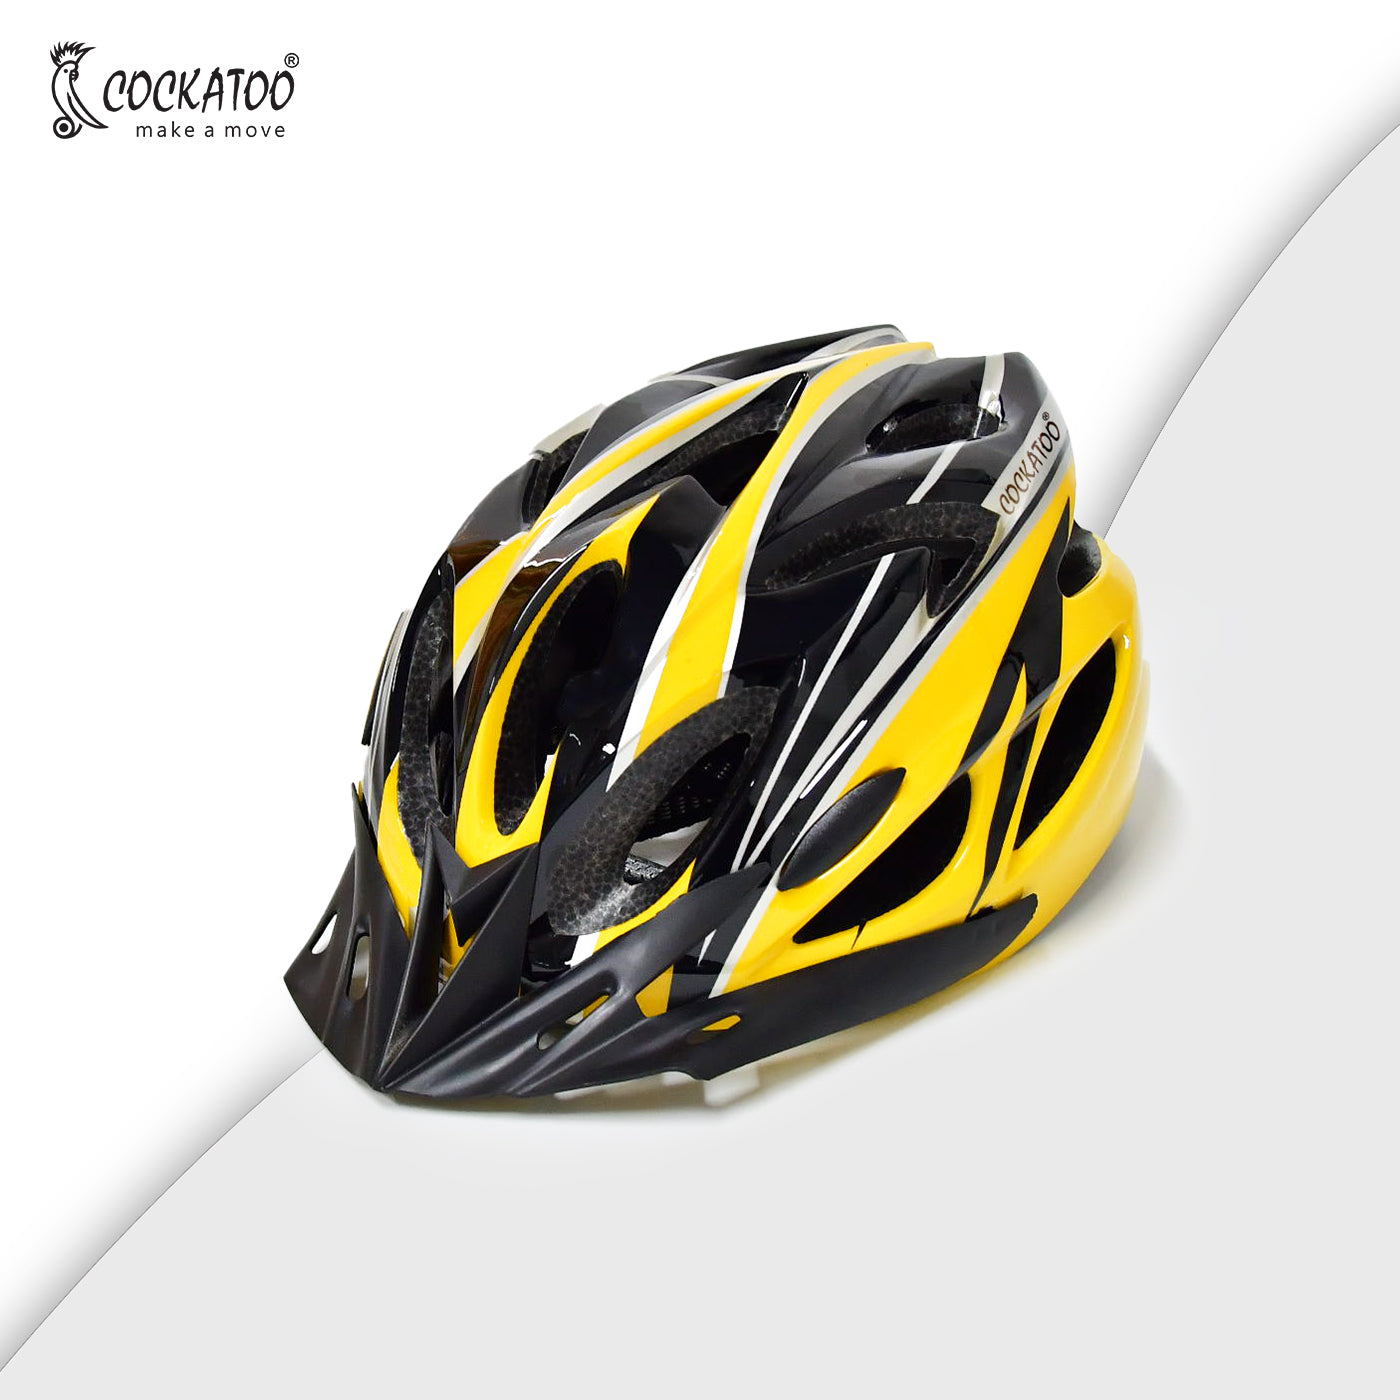 Cockatoo Adjustable Cycling Helmet with Detachable Visor|Adjustable Light Weight Mountain Bike Cycle Helmet with Padding for Kids and Adults|Racing Helmet for Men and Women